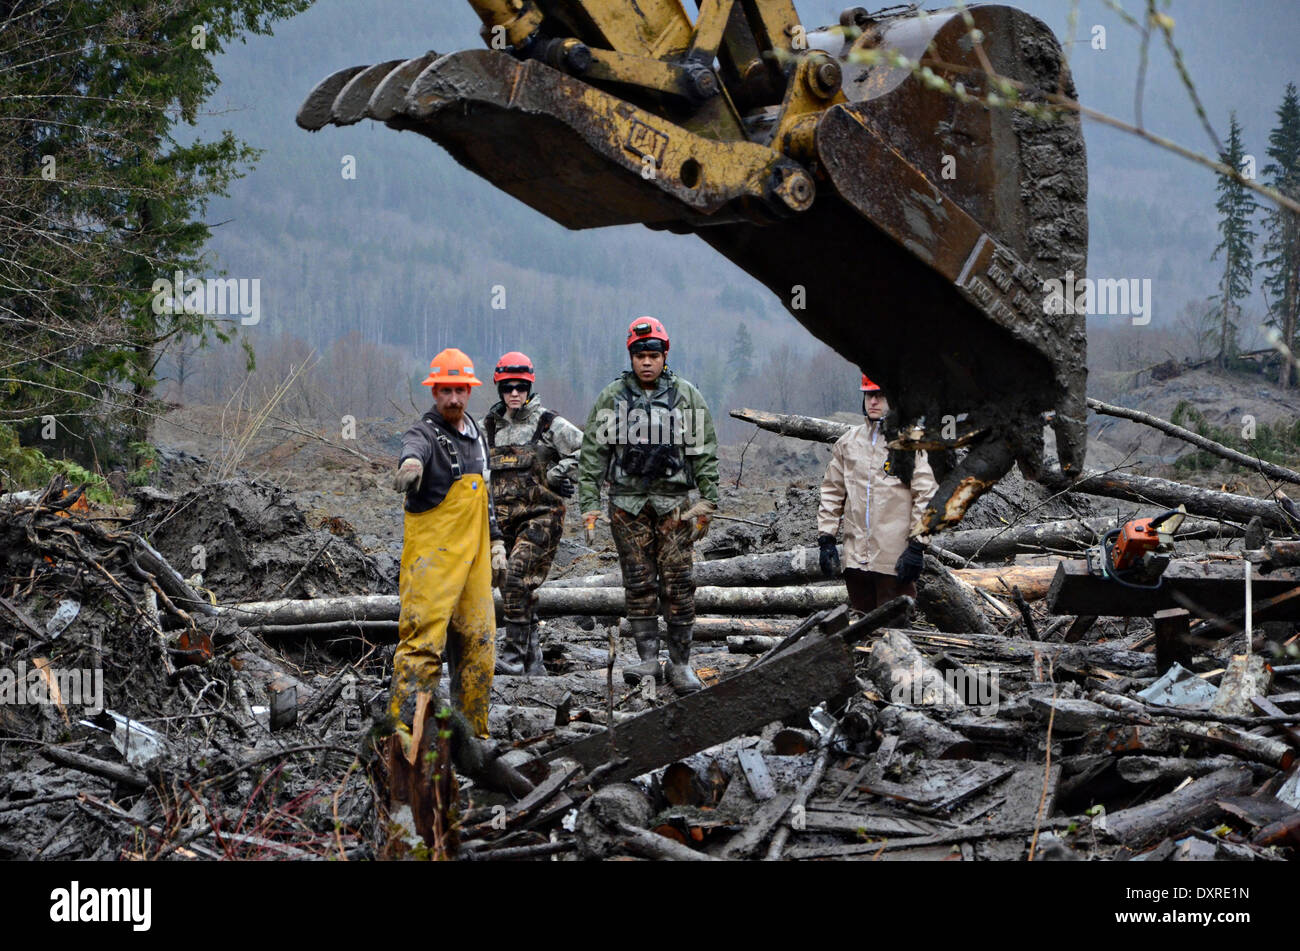 Rescue workers continue efforts to locate victims of a massive landslide that killed at least 28 people and destroyed a small riverside village in northwestern Washington state March 29, 2014 in Oso, Washington. Stock Photo